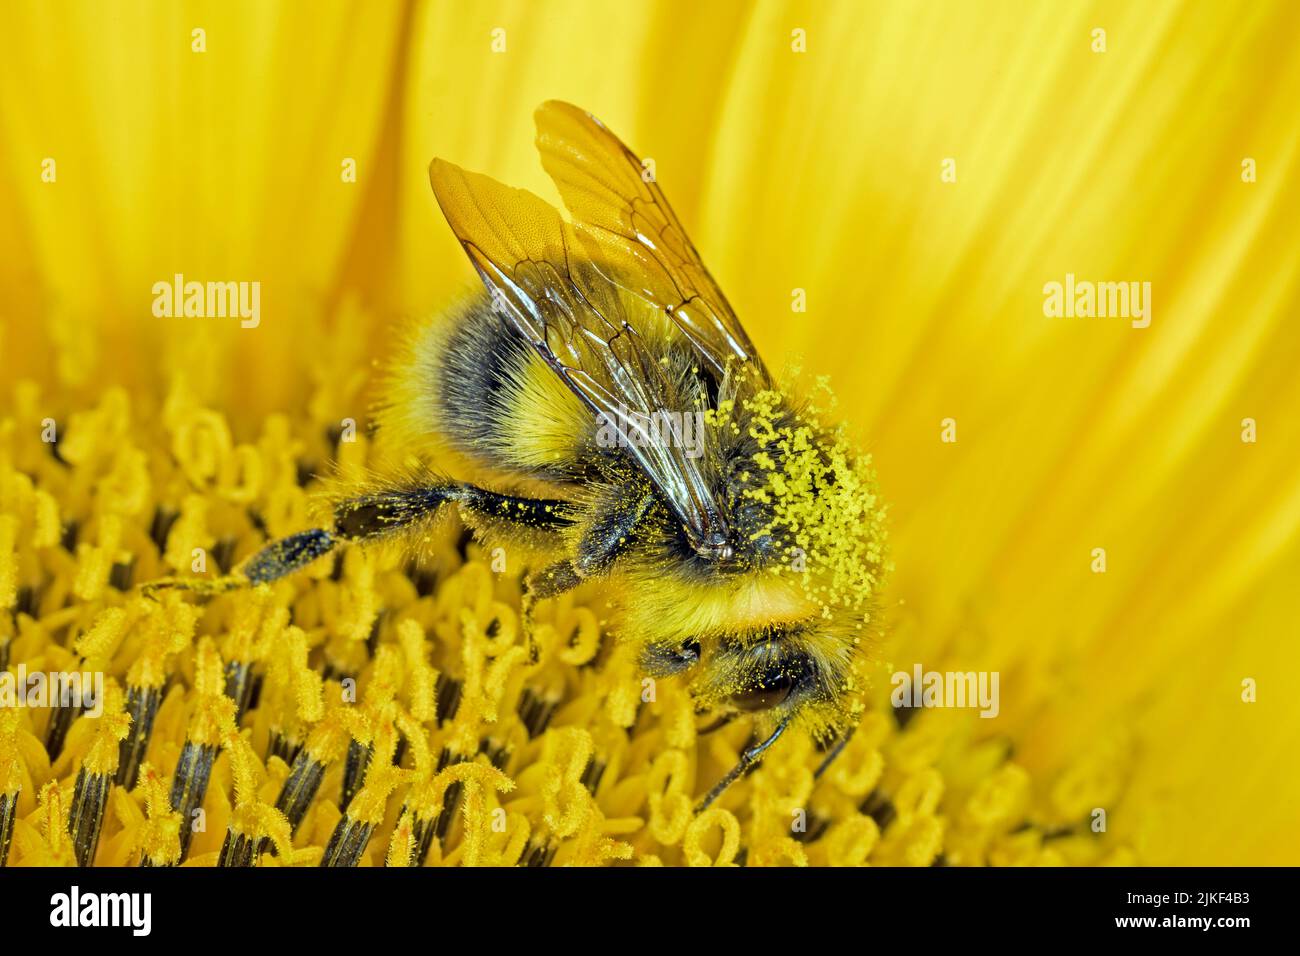 Bumble-bee on a sunflower Stock Photo